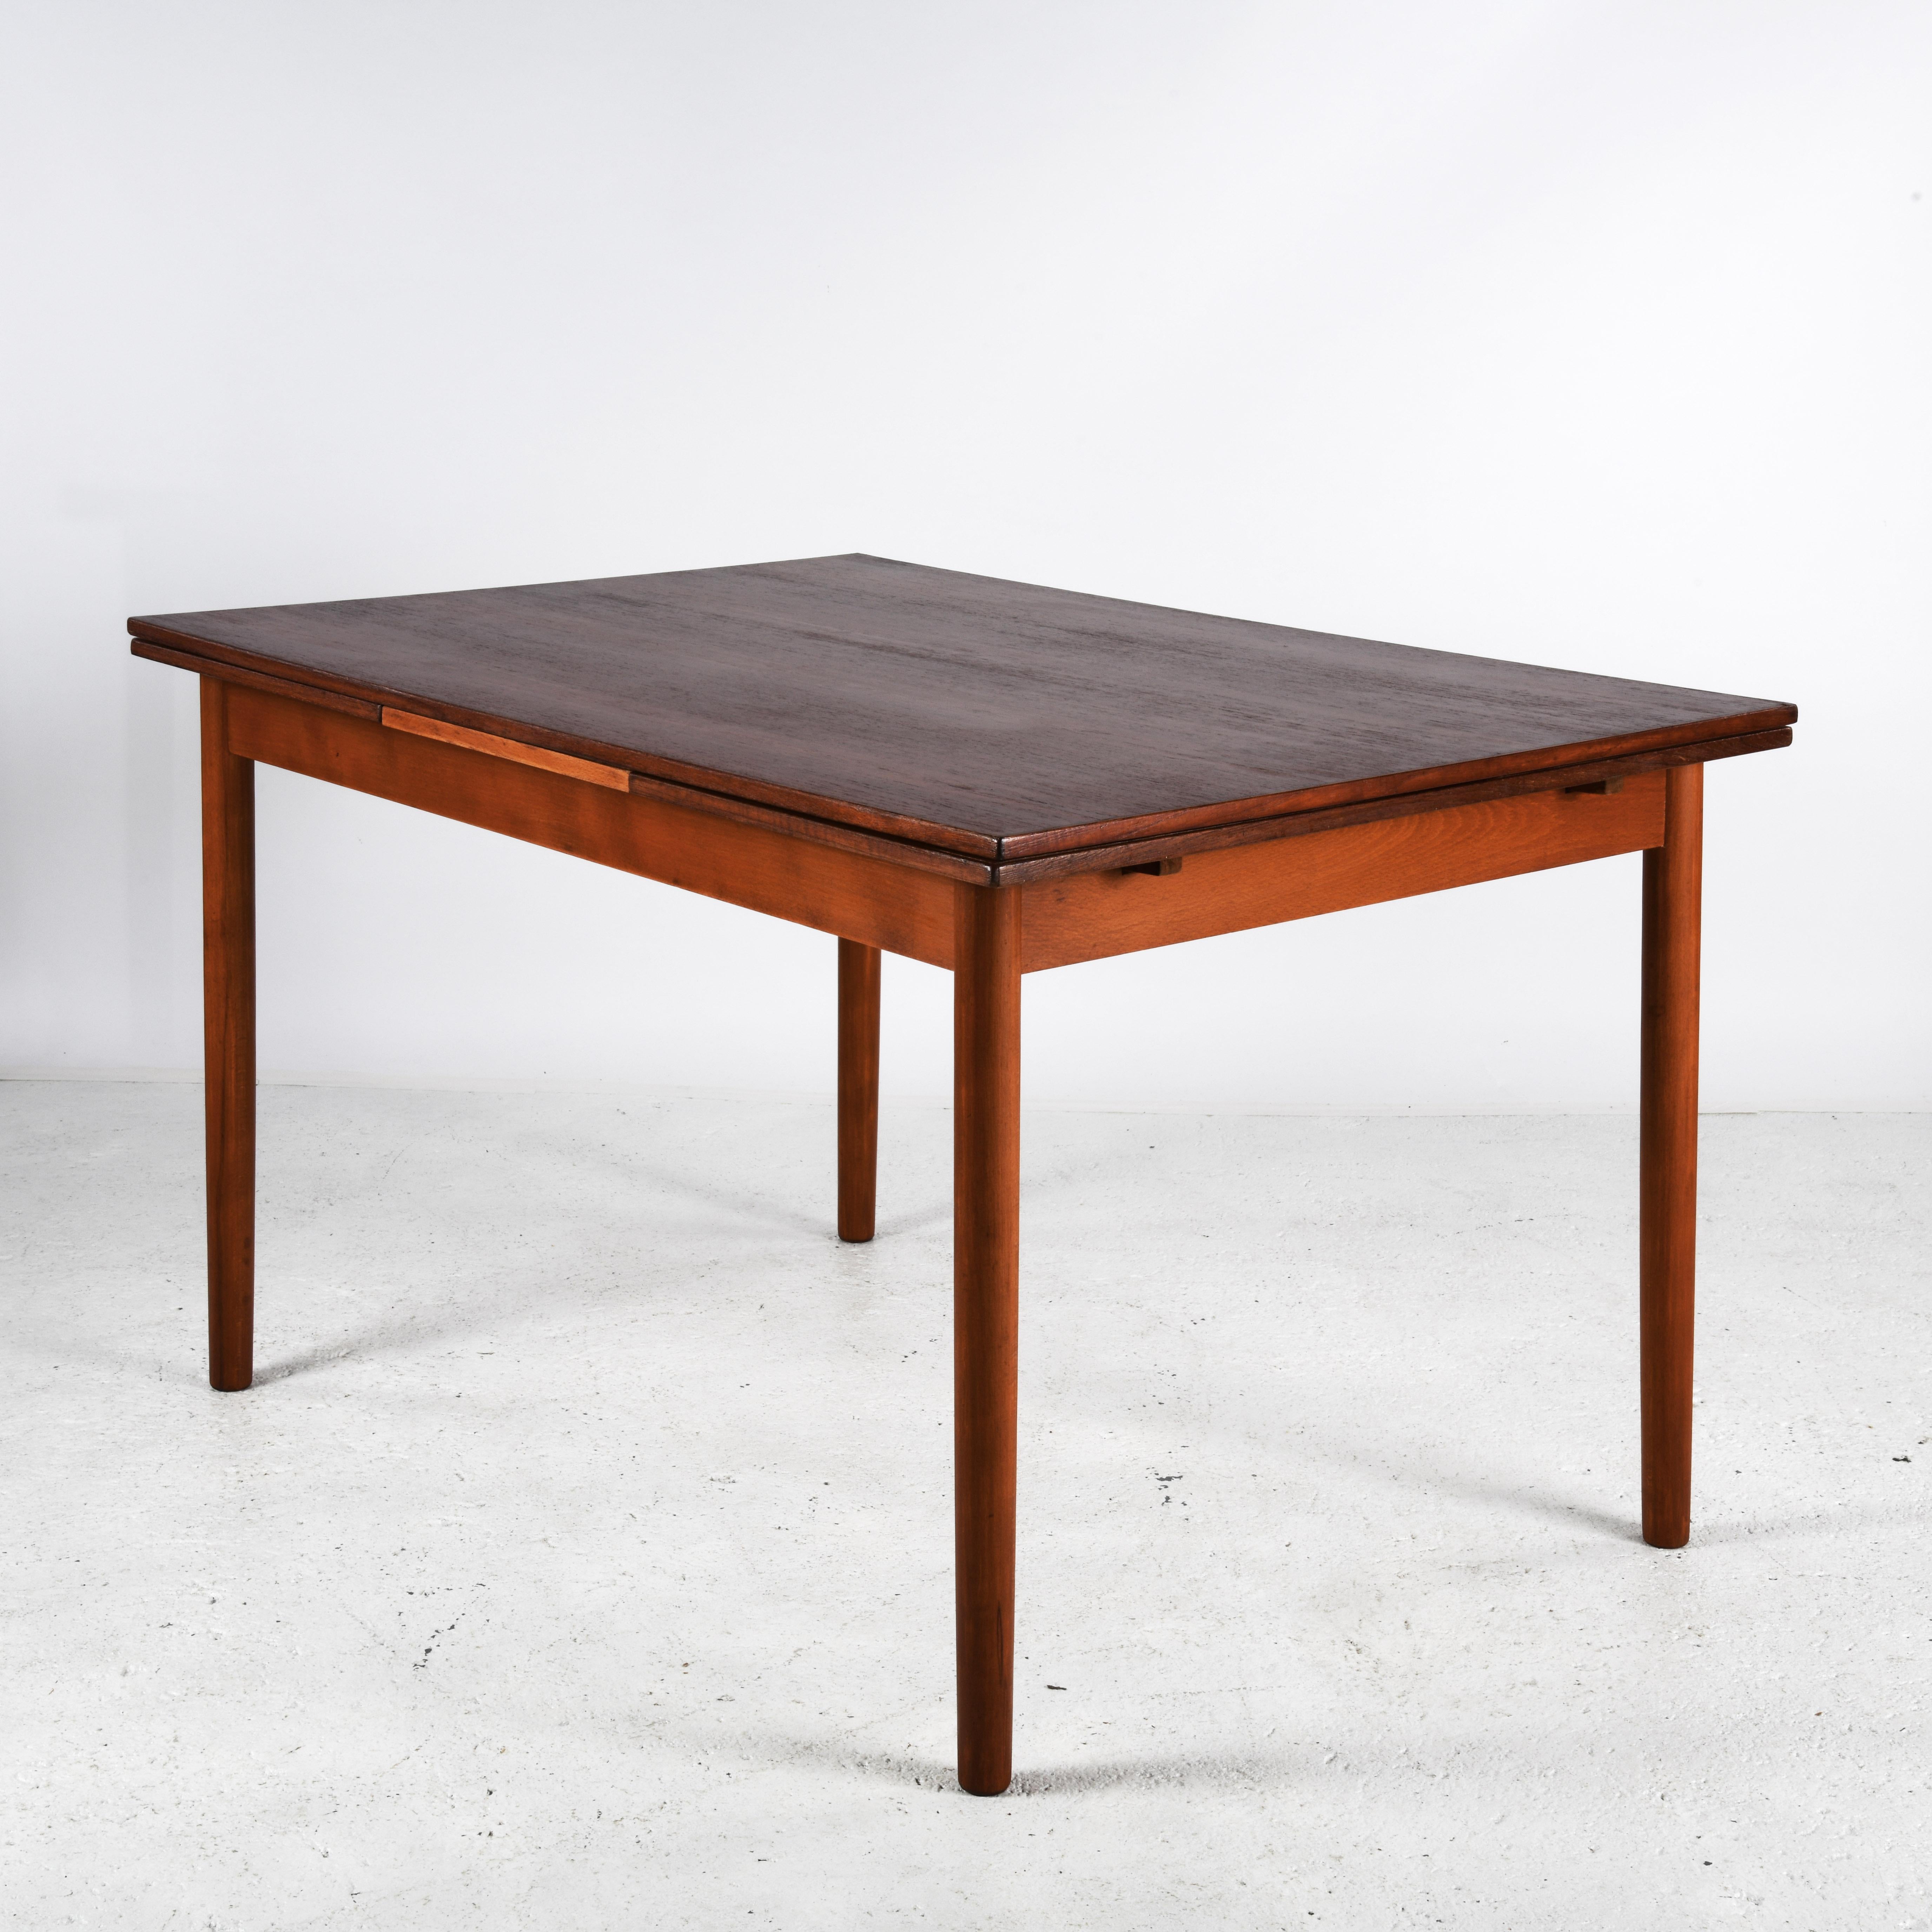 Teak dining table from Denmark, made in the 1960s/70s. The table has a top and two retractable leaves underneath. The tops are protected with a satin varnish for use without a tablecloth. The legs are easy to dismantle and reassemble, making them